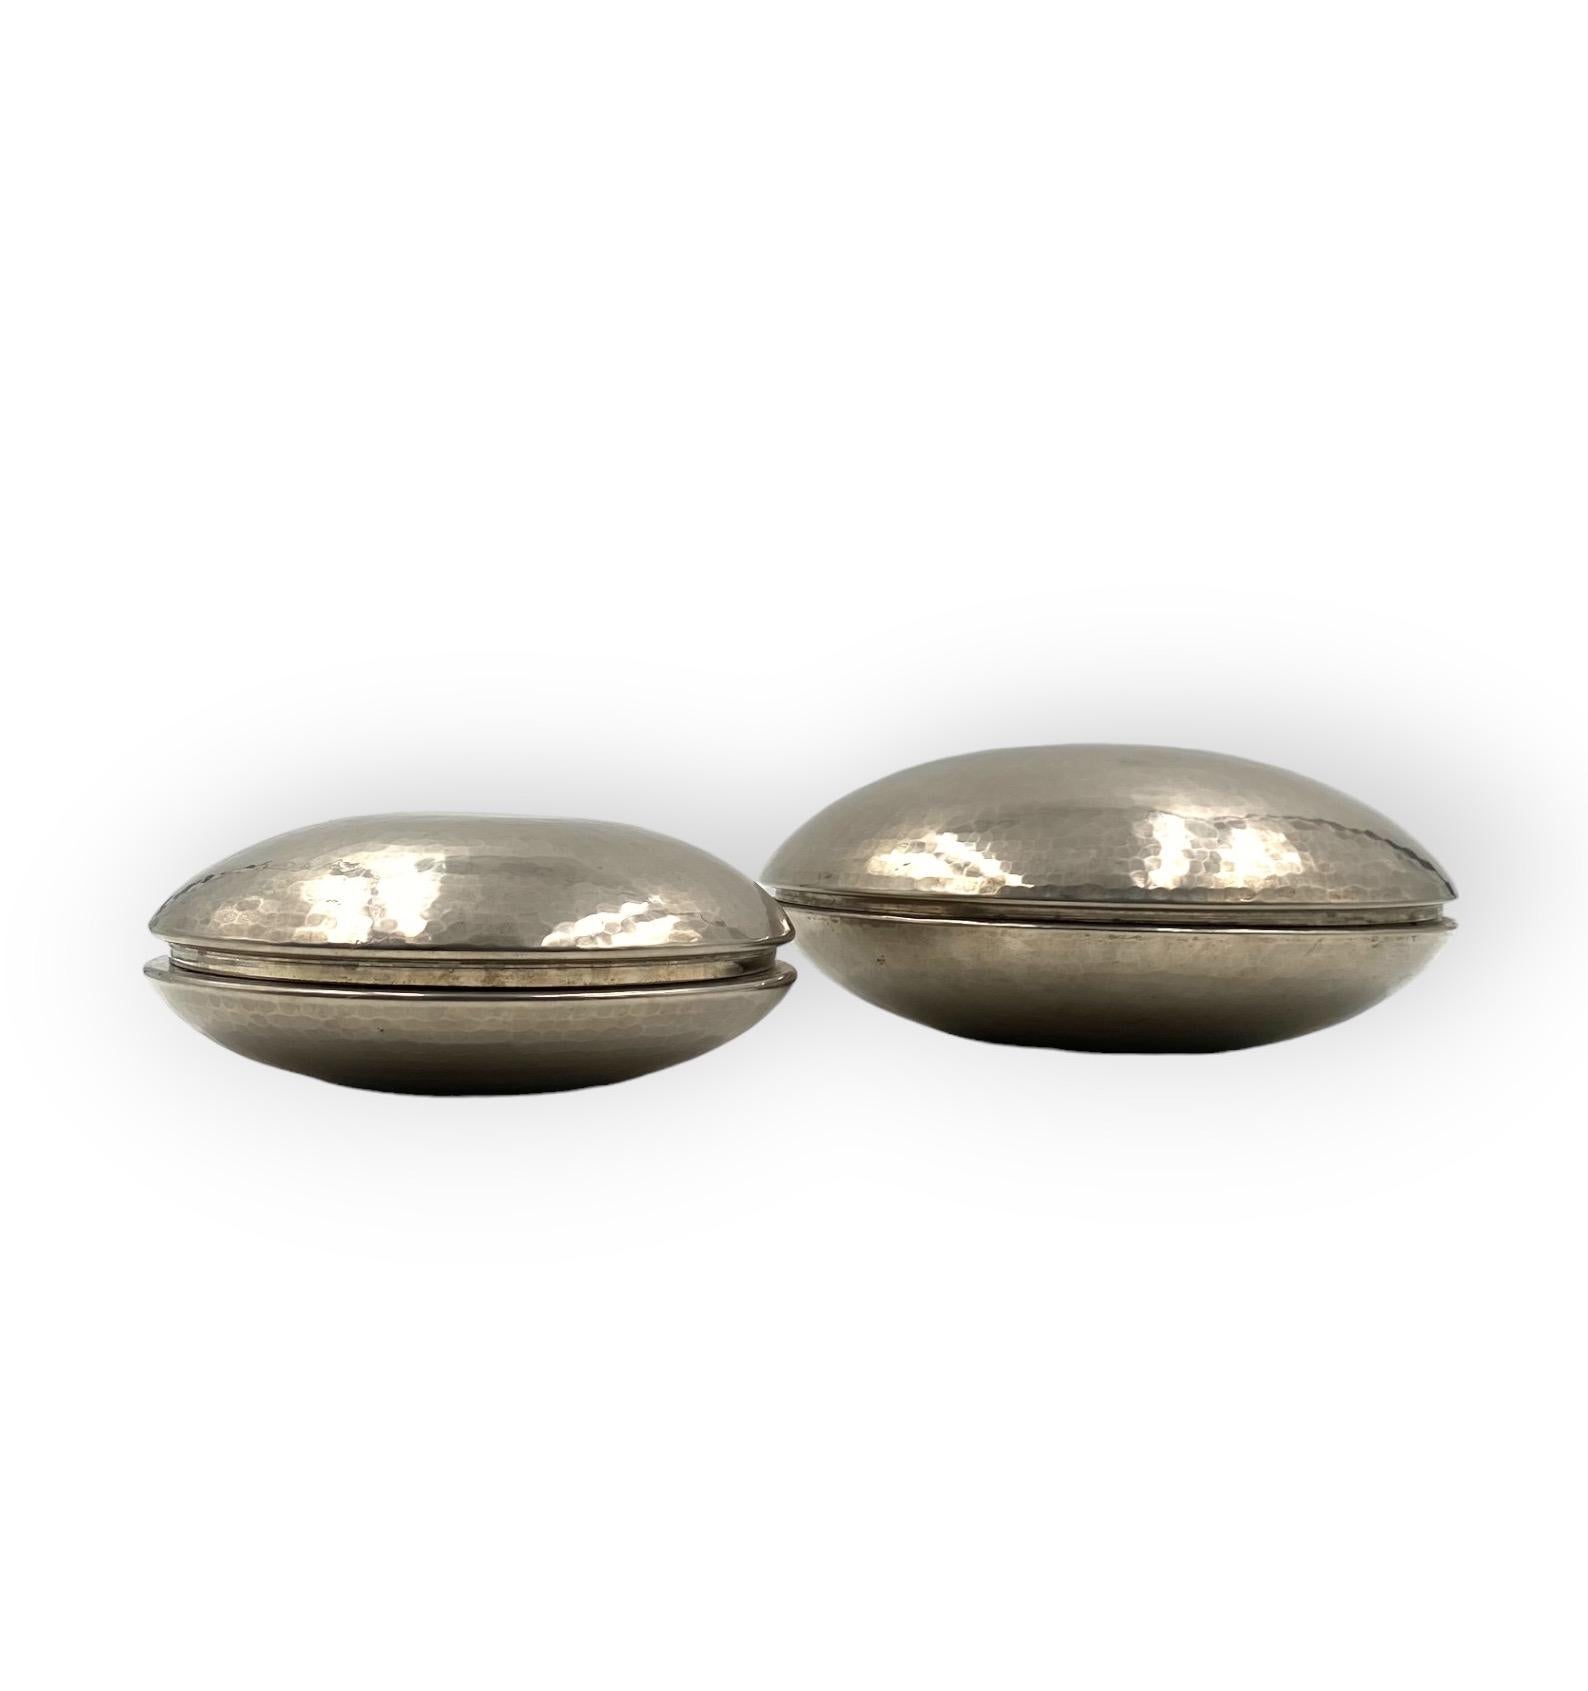 Hollywood regency silver-plated set of 2 vide poche, M. Marini, Laras Italy 1970 For Sale 8